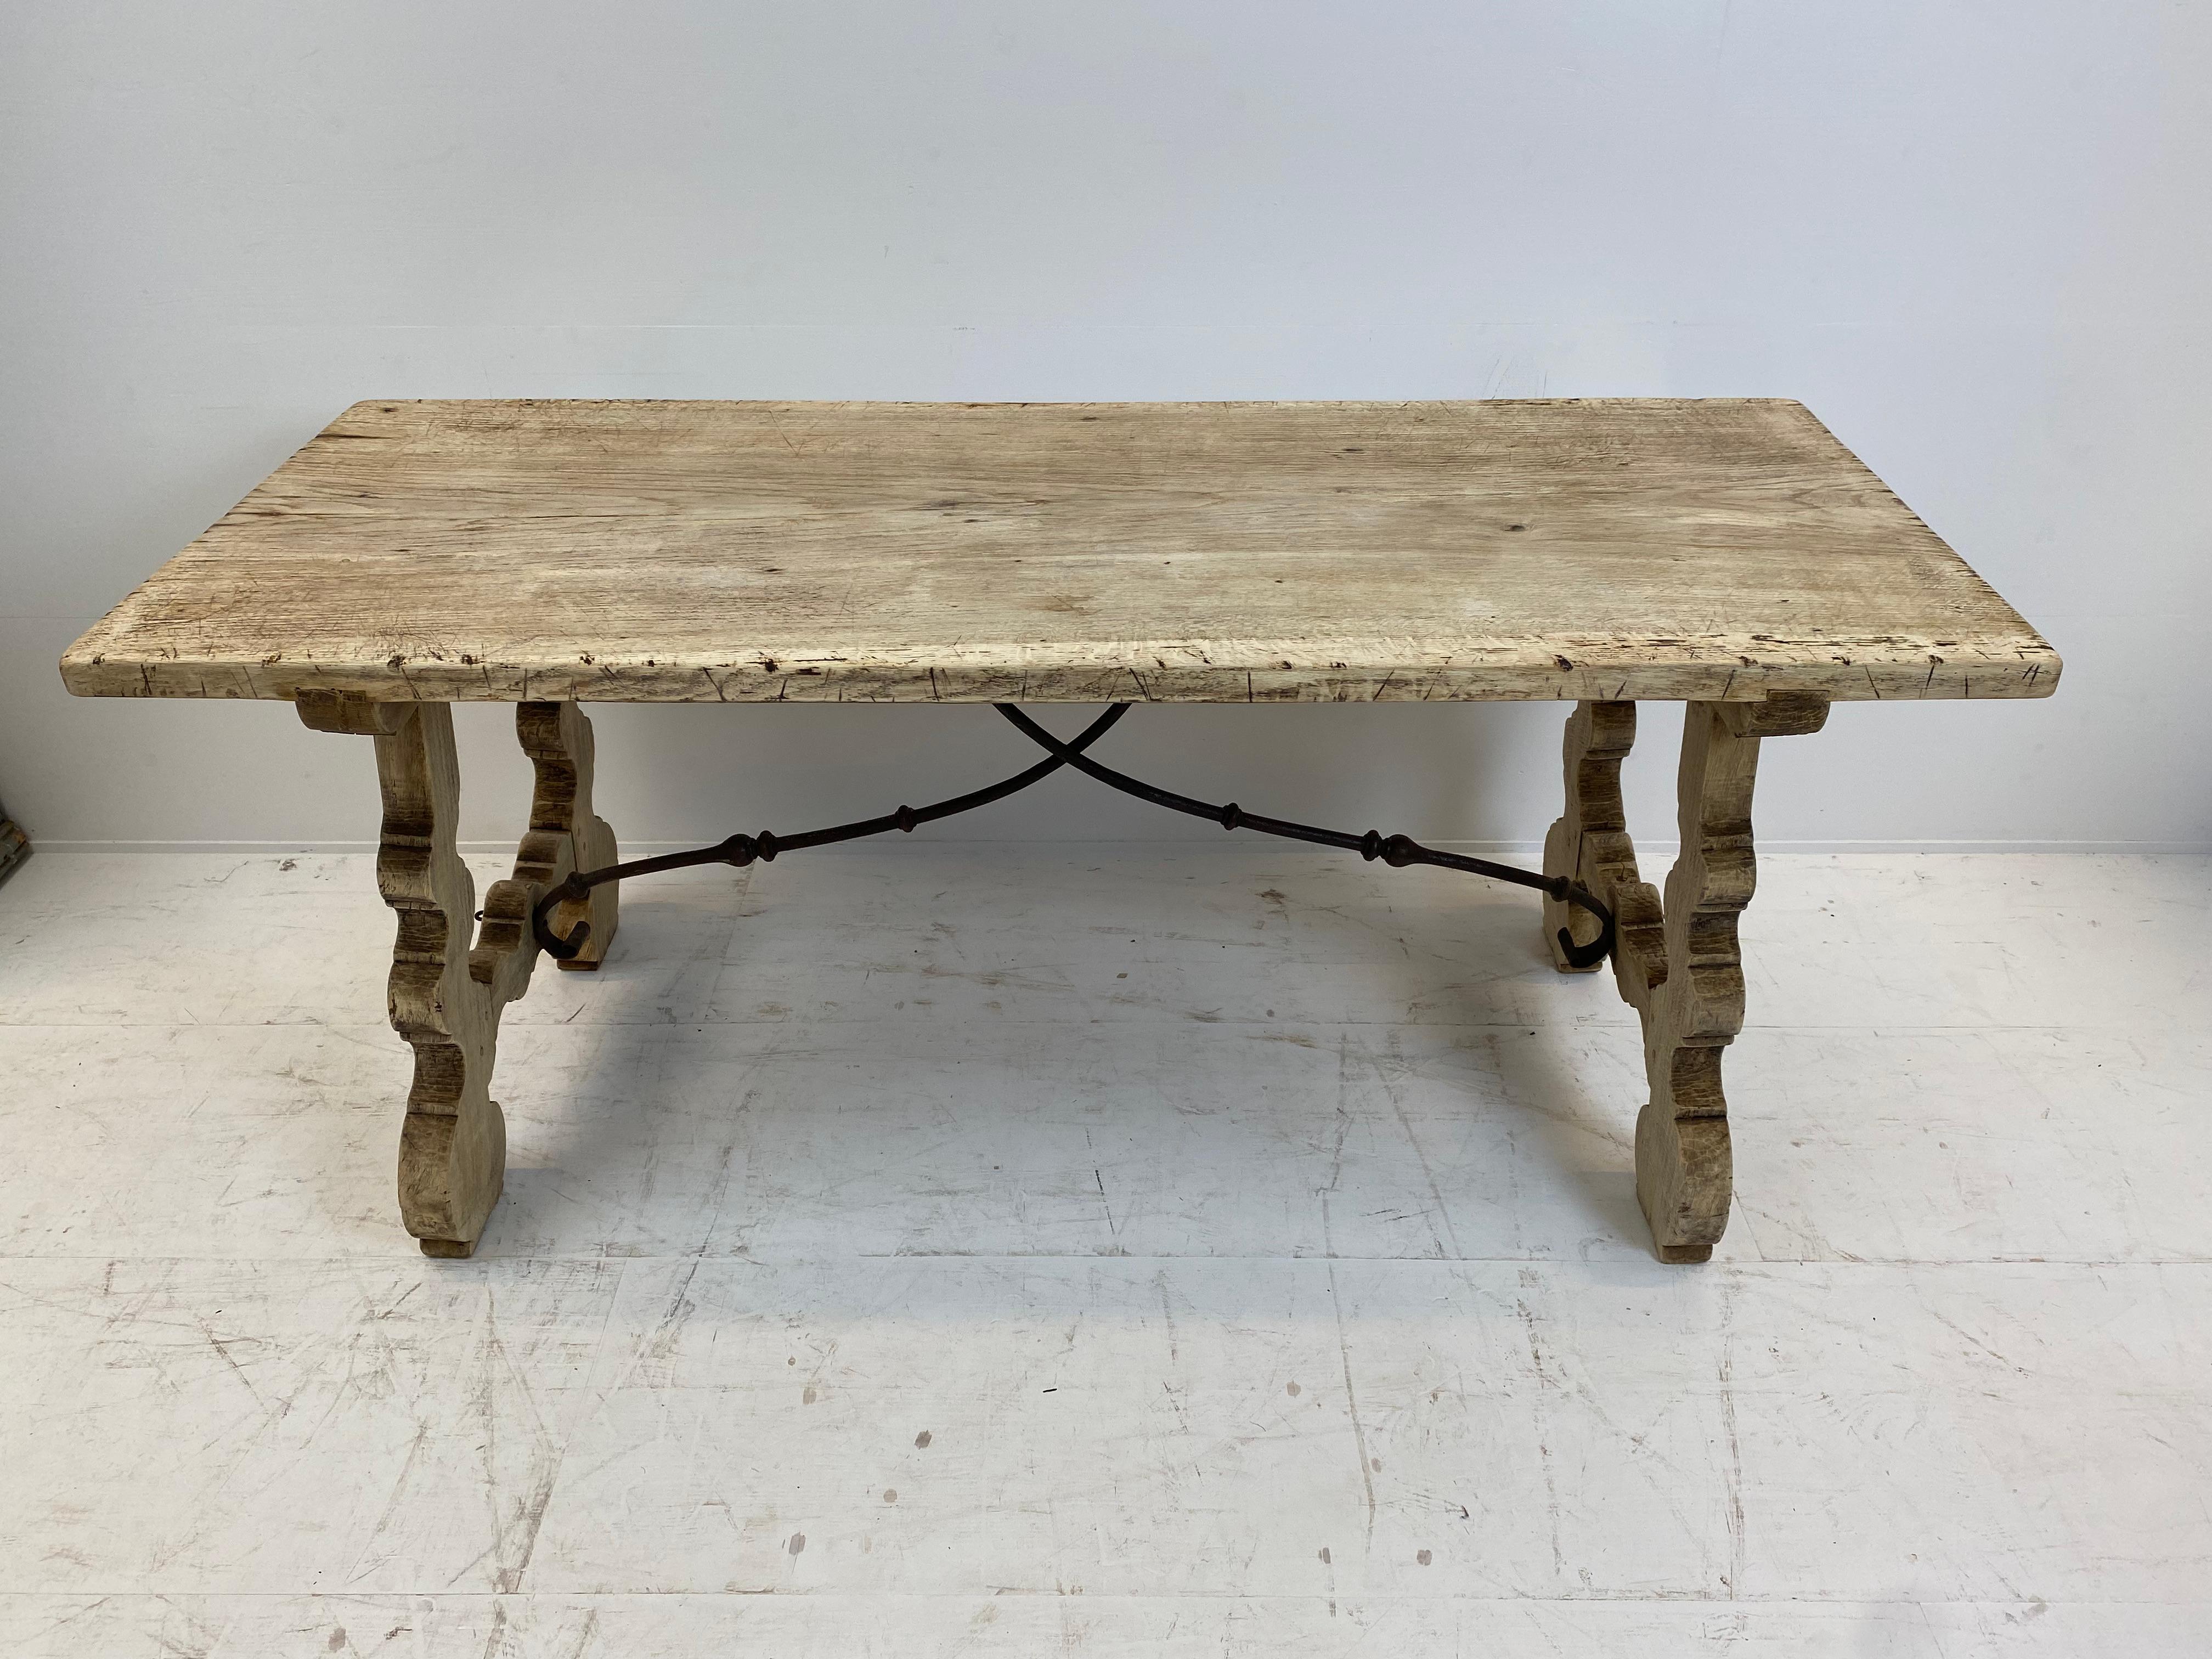 Elegant Spanish Bleached walnut table, Spain, 1820
One wood piece top of 4 cm,
Great good old patina and original cast iron connections.